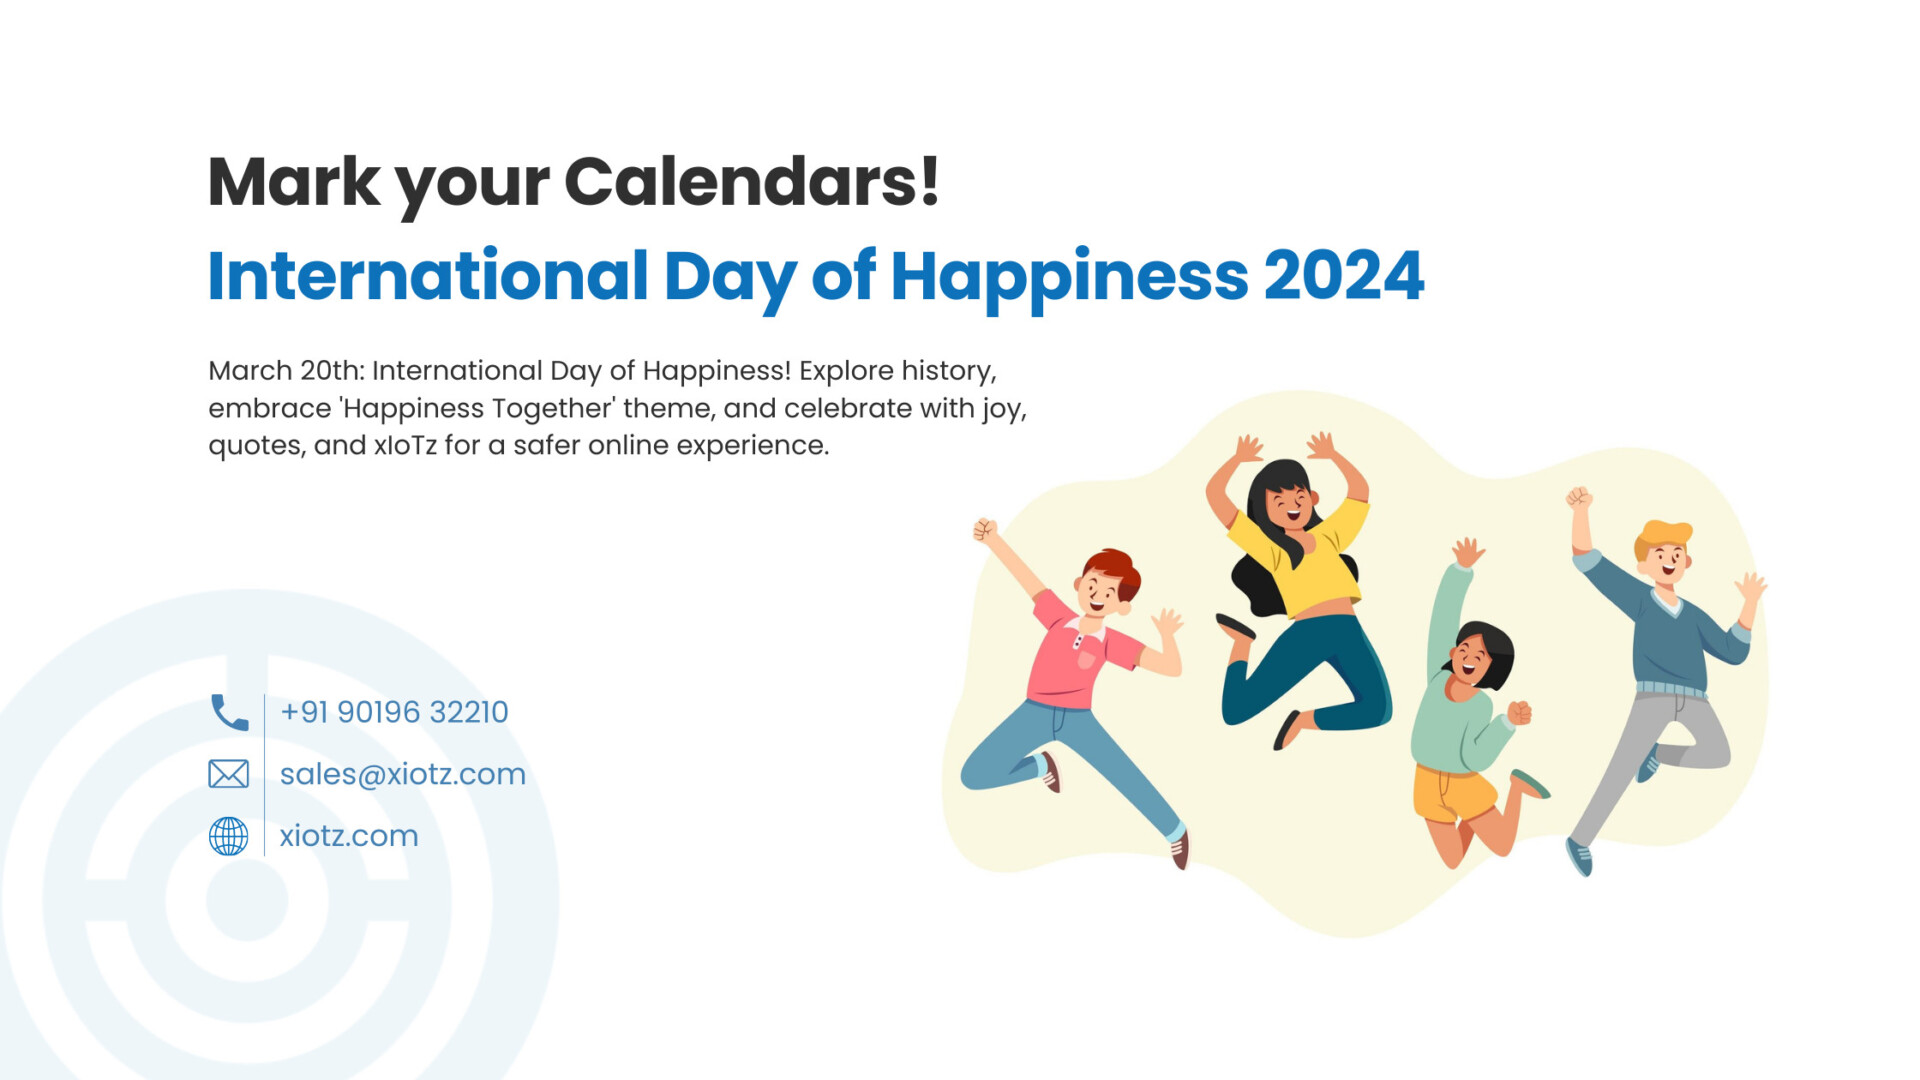 Mark your Calendars! International Day of Happiness 2024